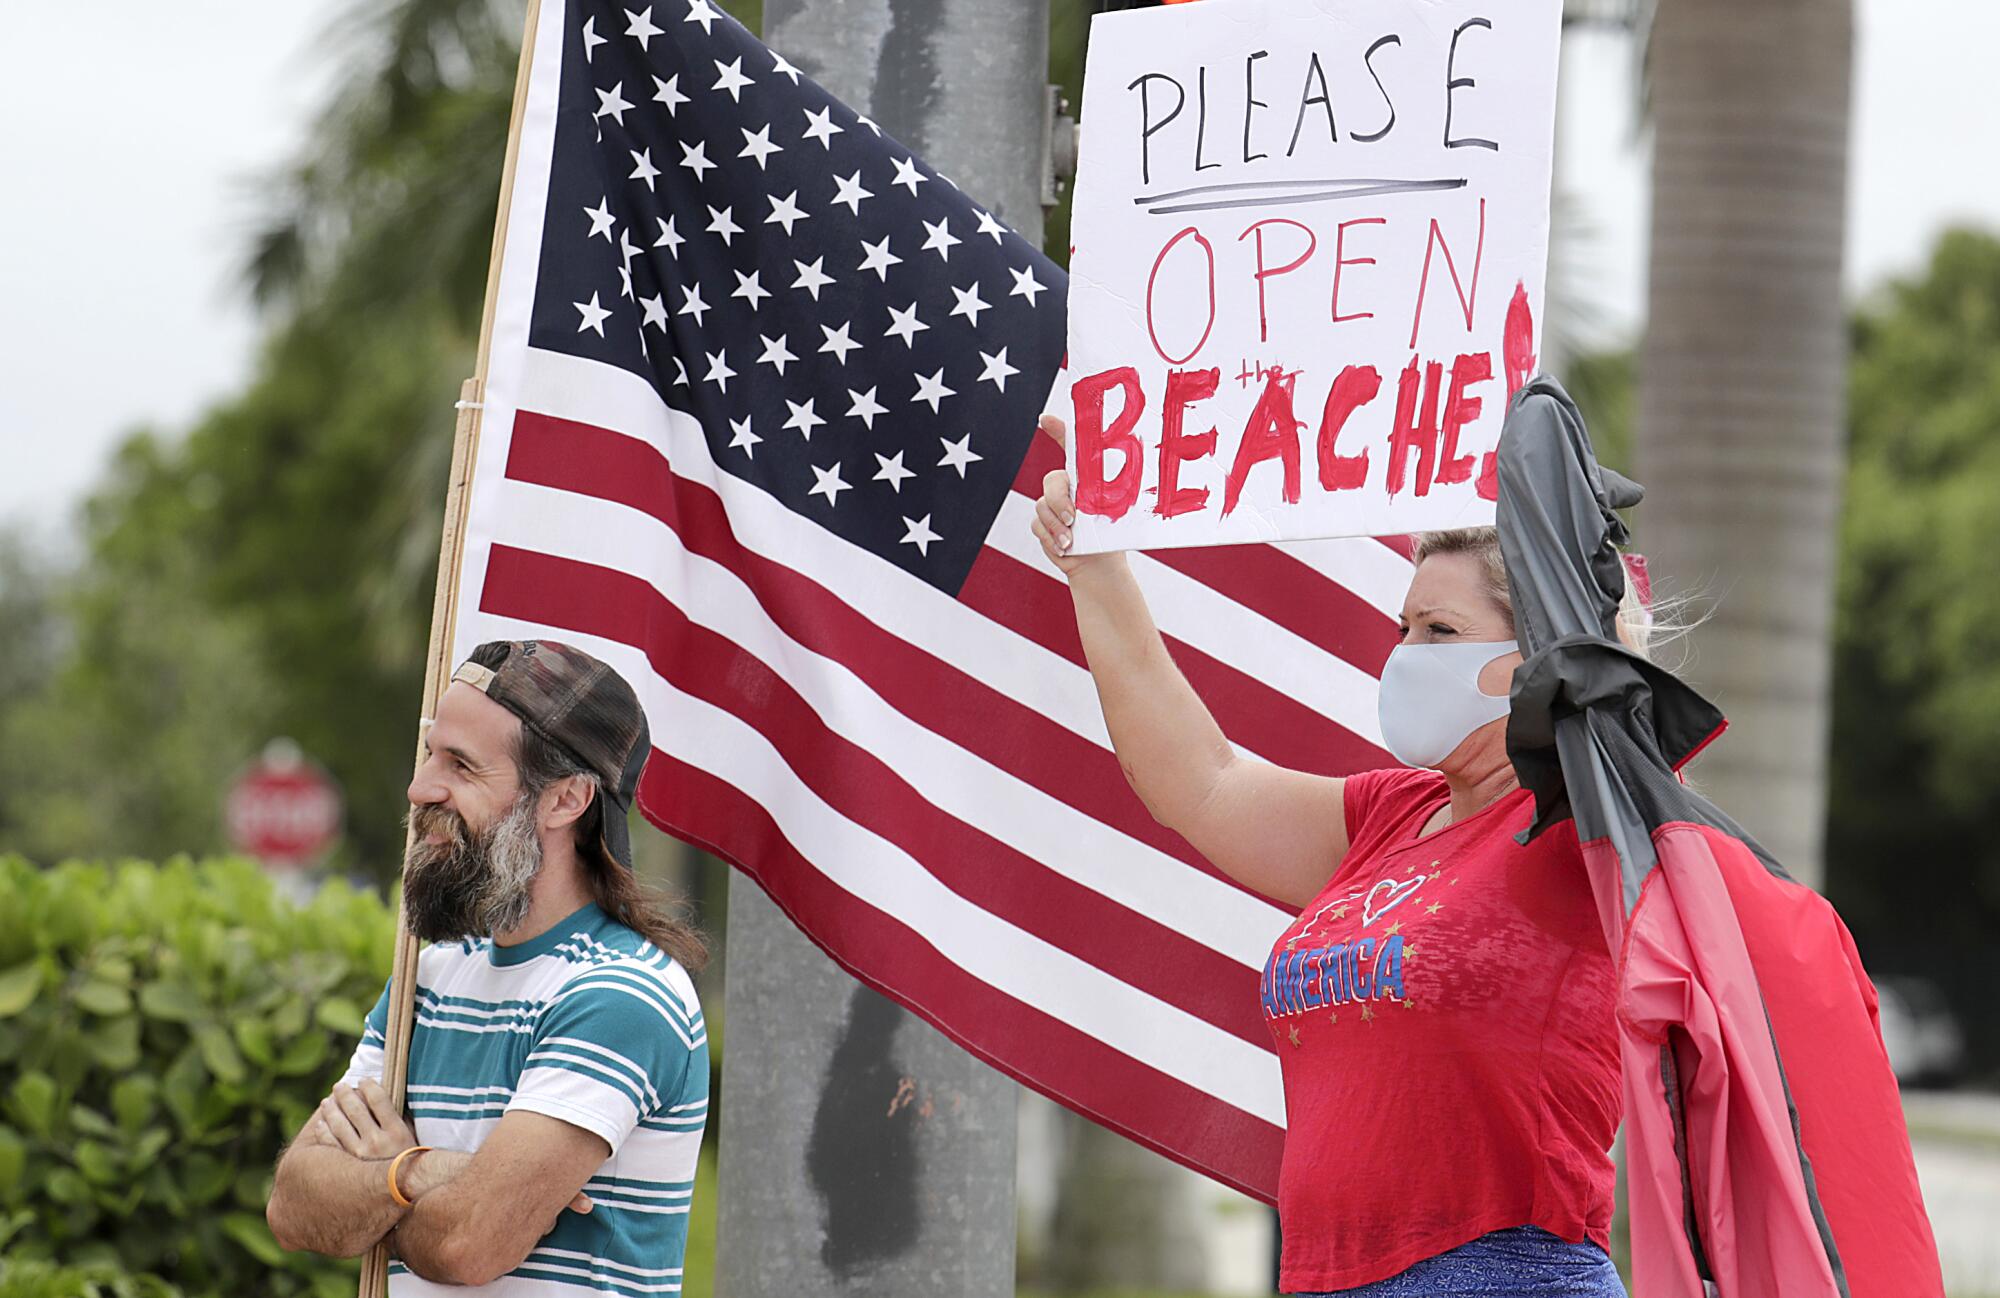 A protest in May in Doral, Fla.